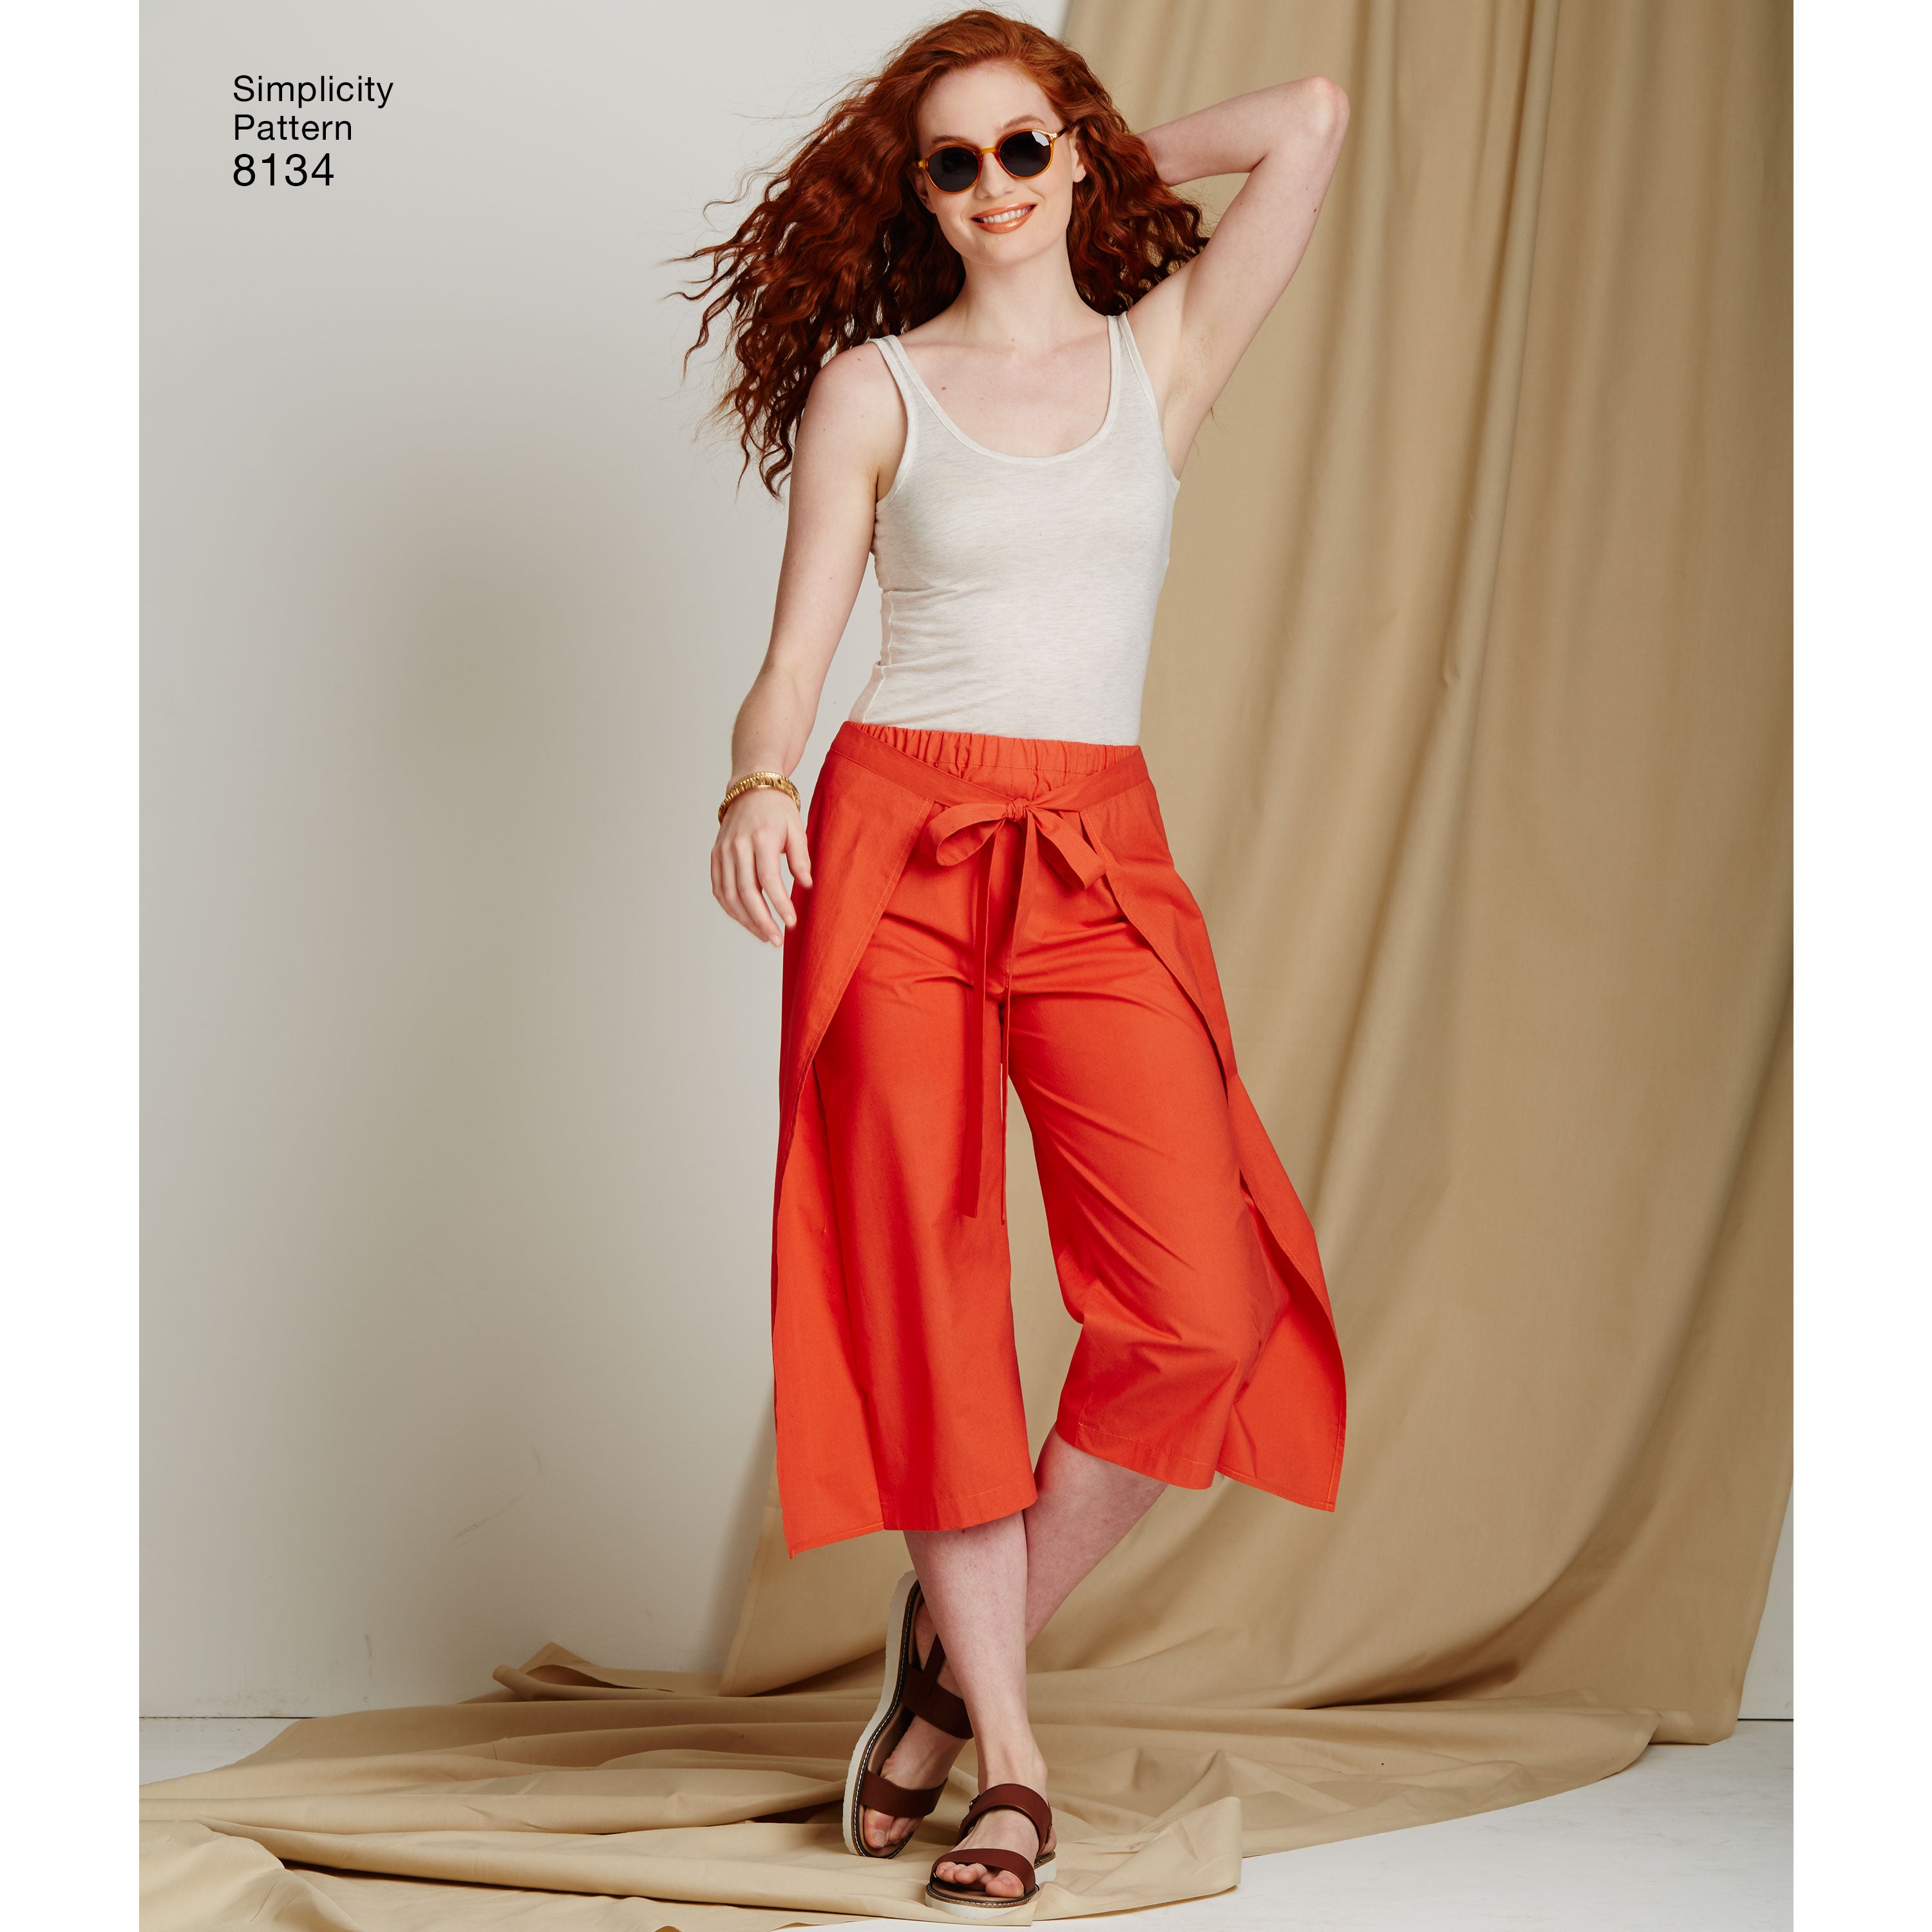 SIMPLICITY 1069 Misses Wide Leg Pants or Shorts  Skirts in 2 Lengths  Sewing Template Size P5 1214161820  Amazonin Home  Kitchen